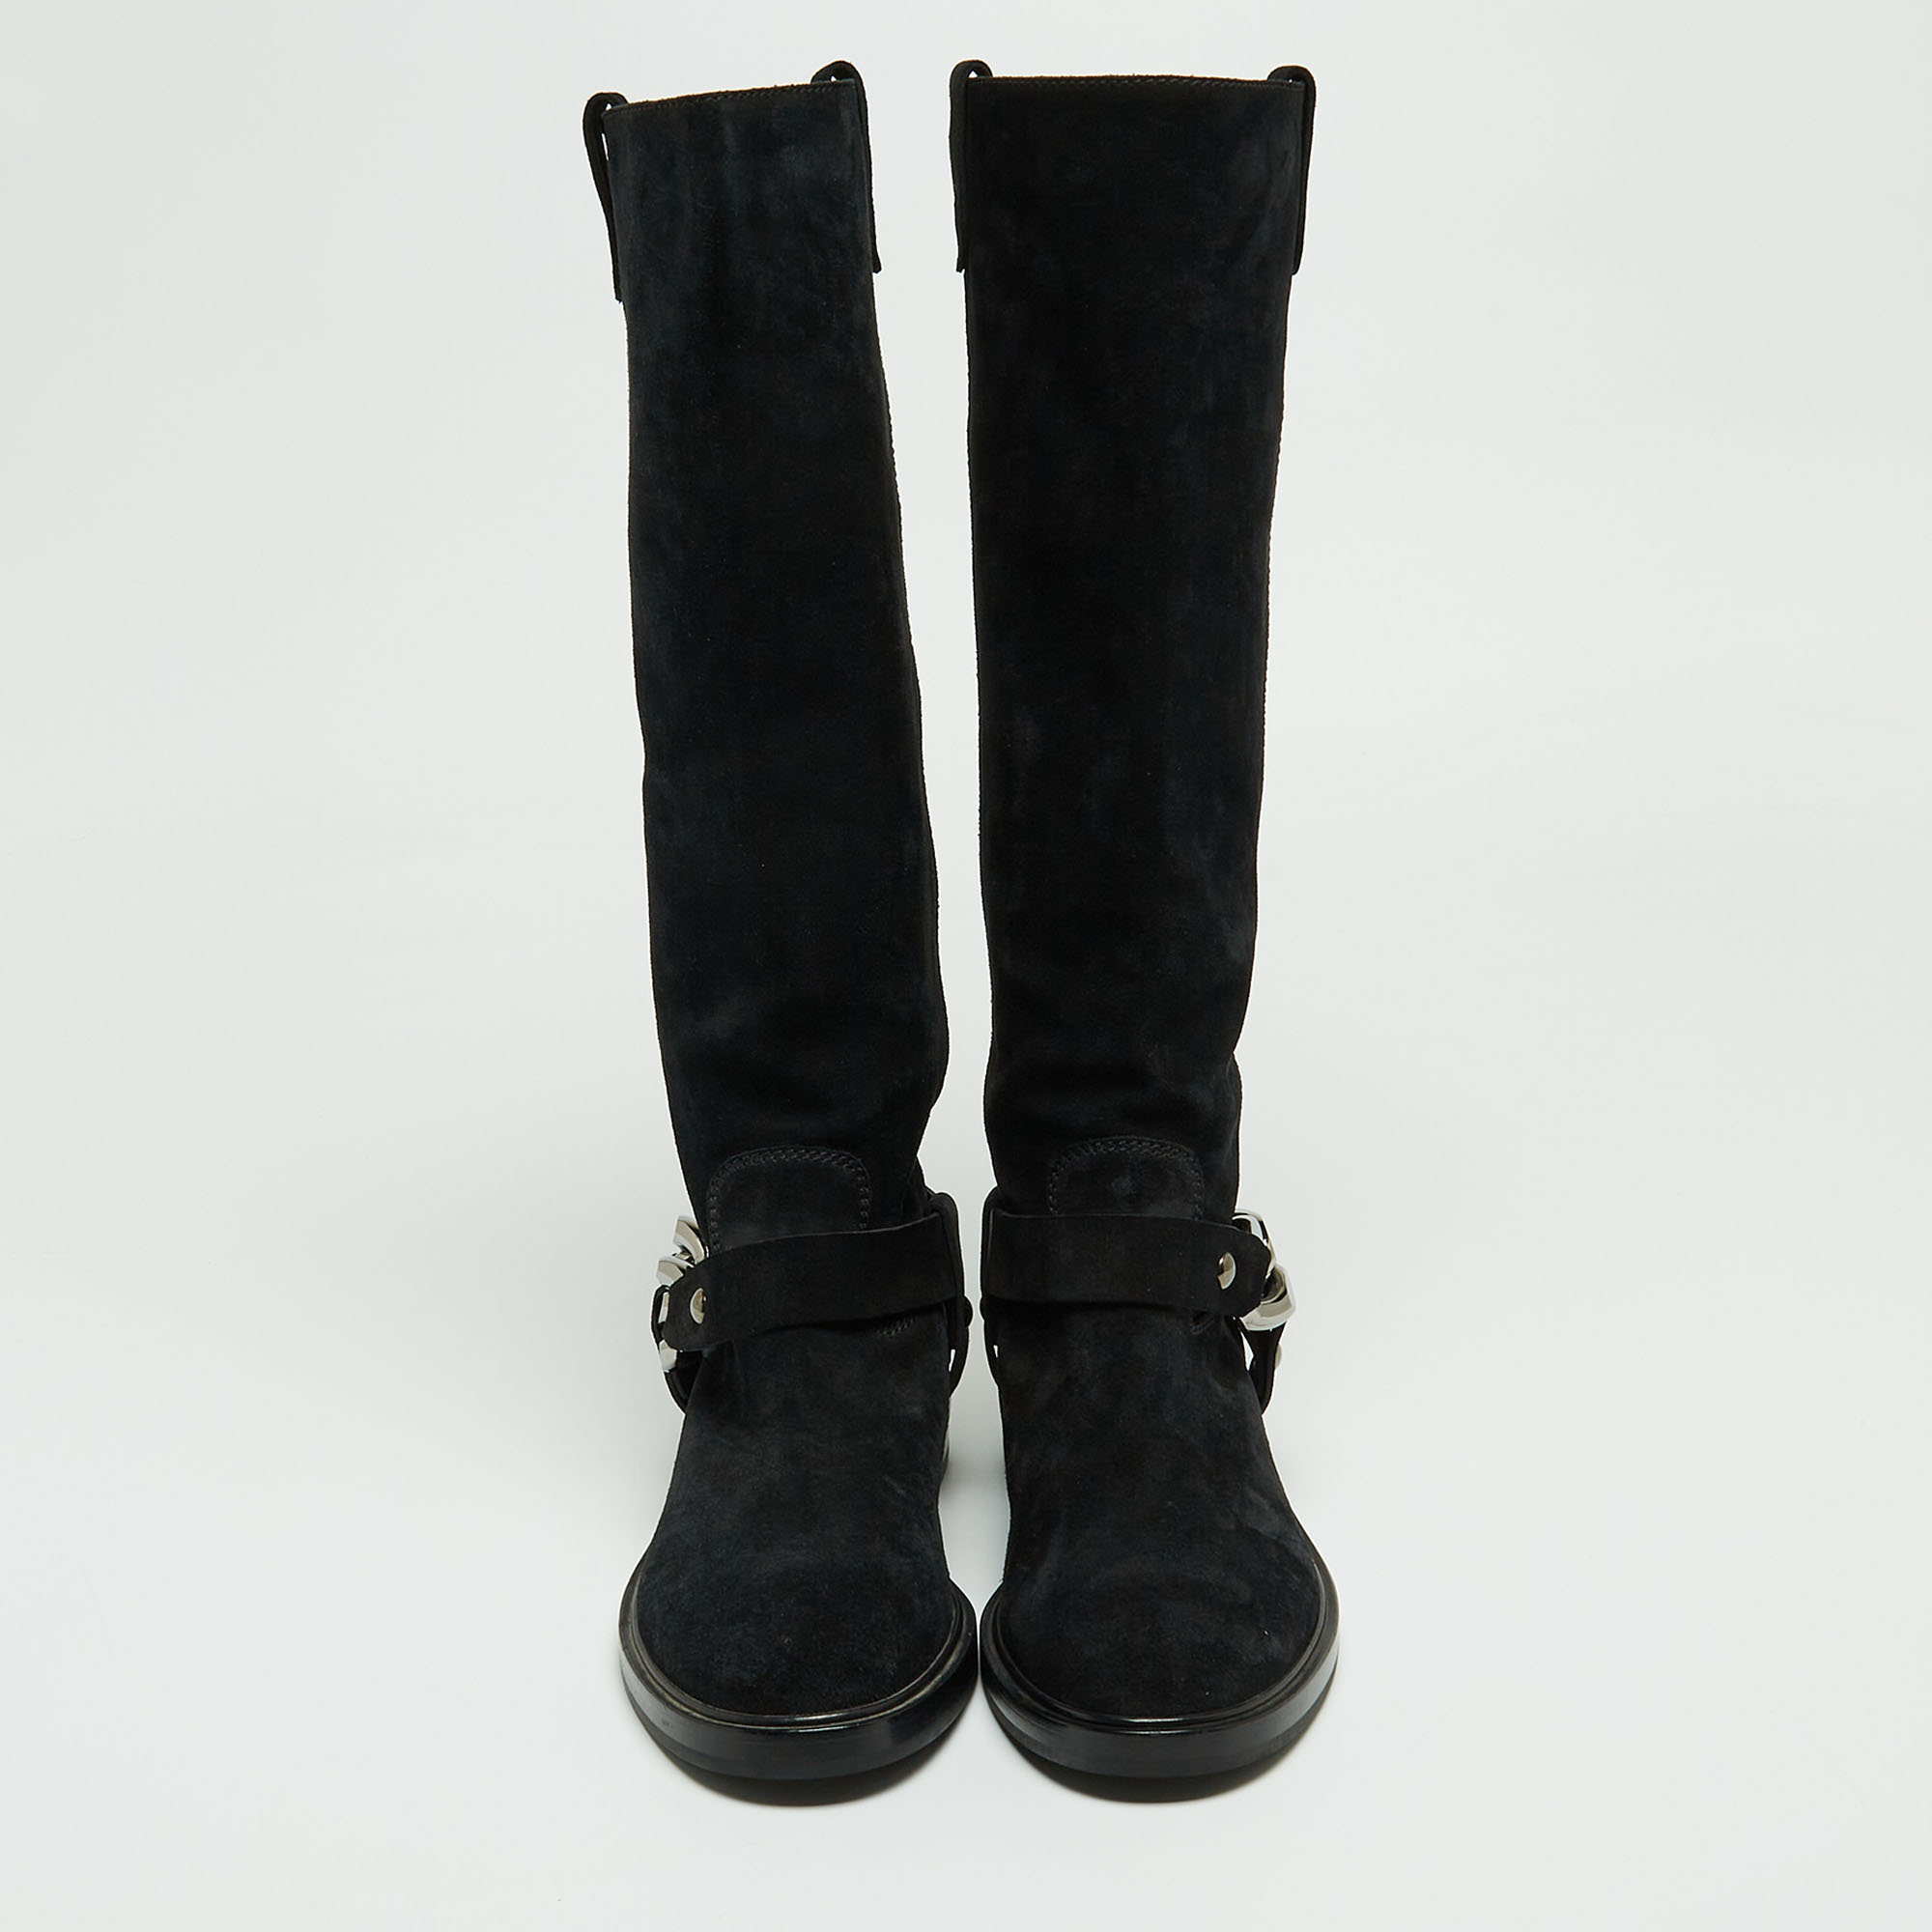 Casadei Black Suede Knee Length Boots Size 38.5